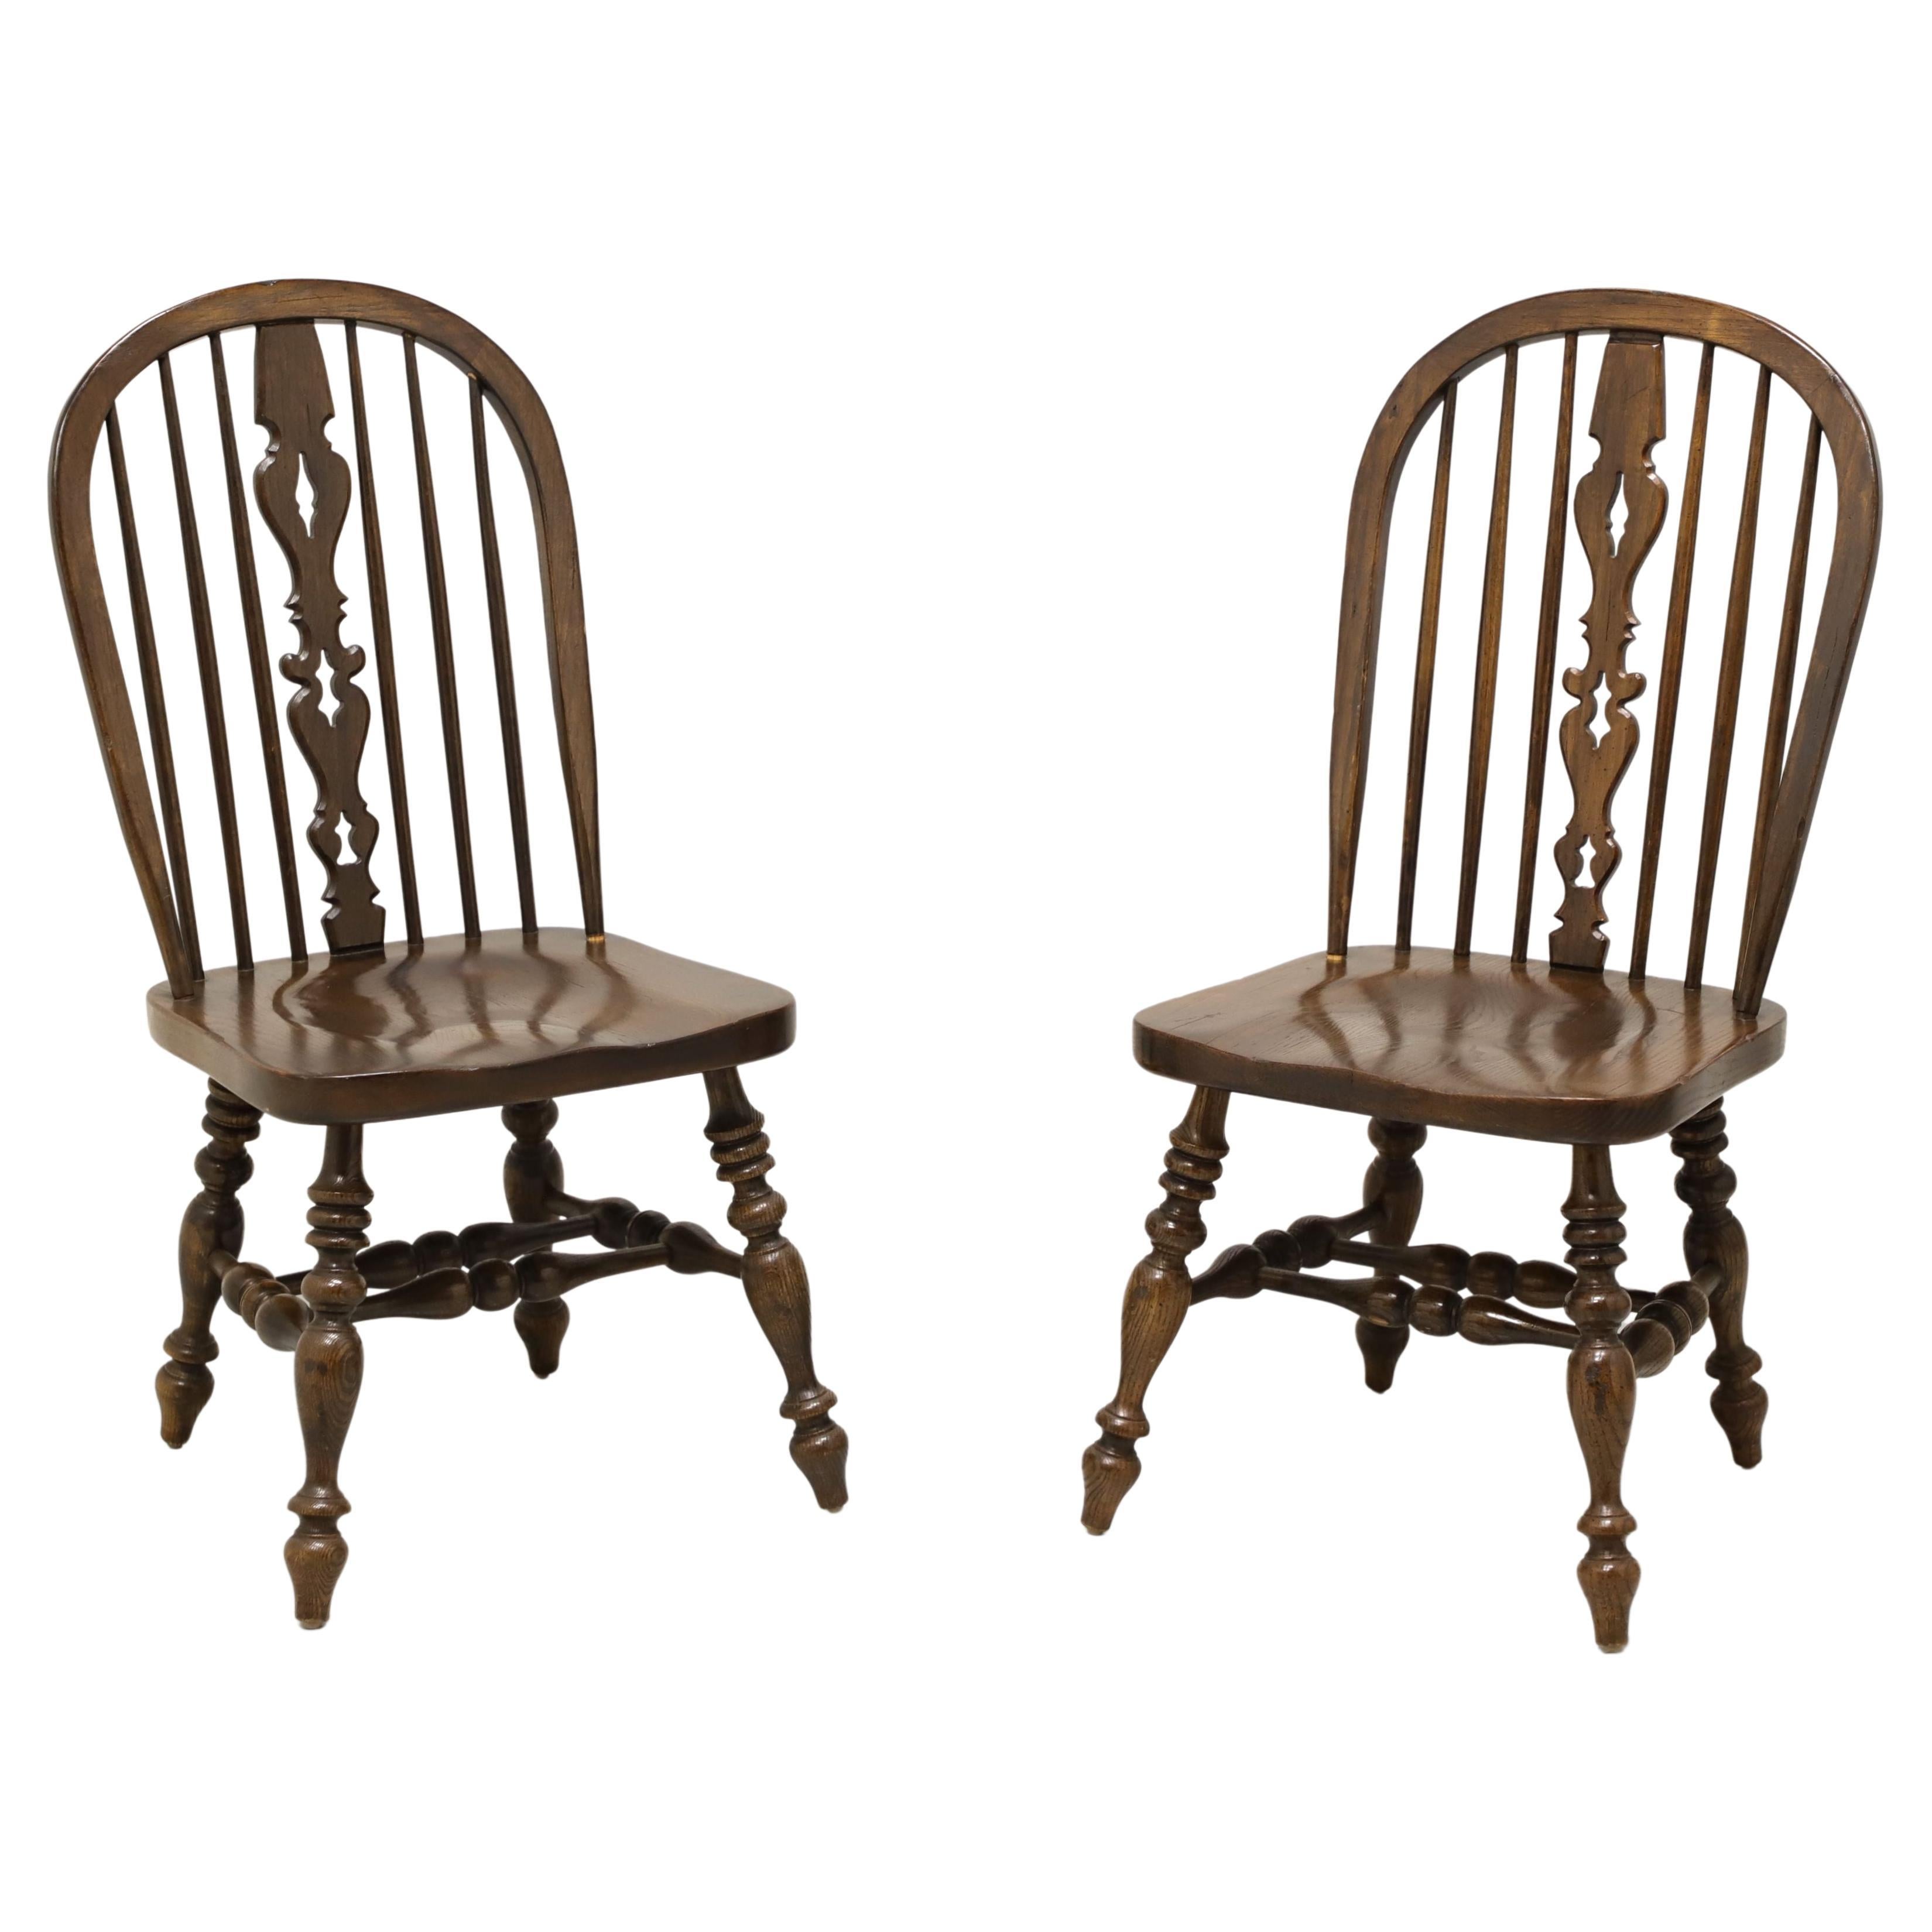 ETHAN ALLEN Royal Charter Oak Bowback Windsor Dining Side Chairs - Pair A